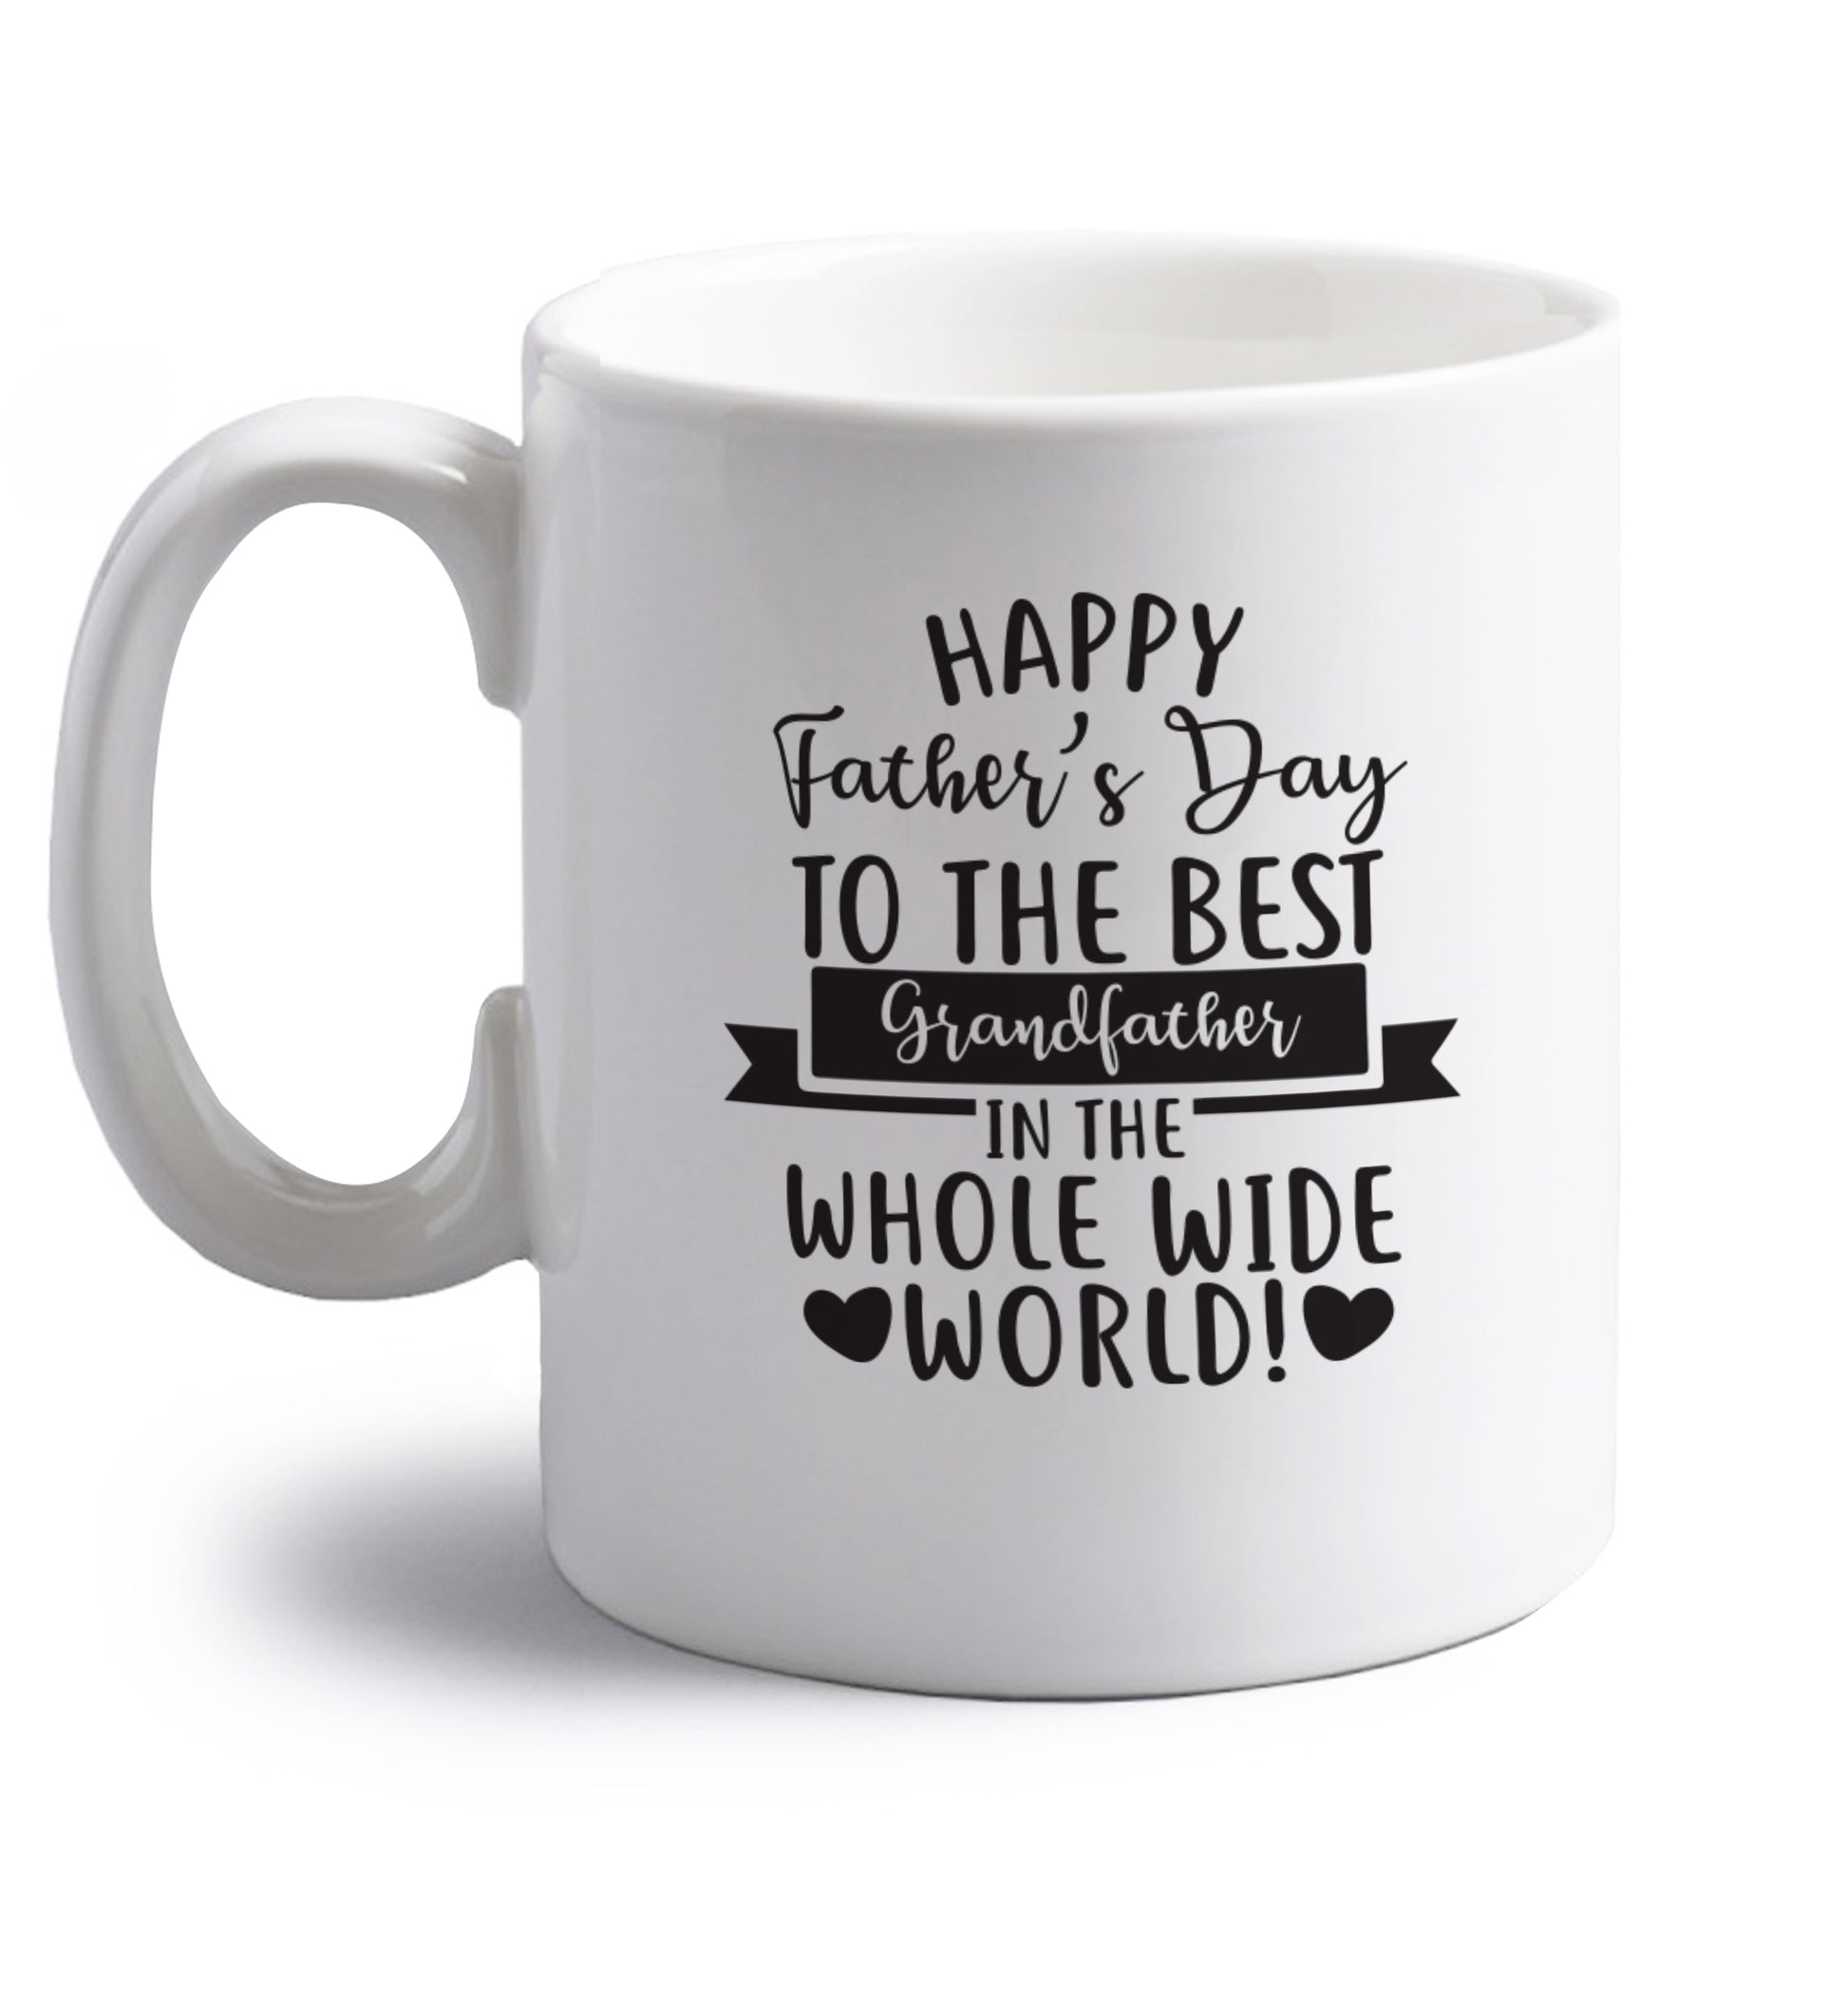 Happy Father's Day to the best grandfather in the world right handed white ceramic mug 